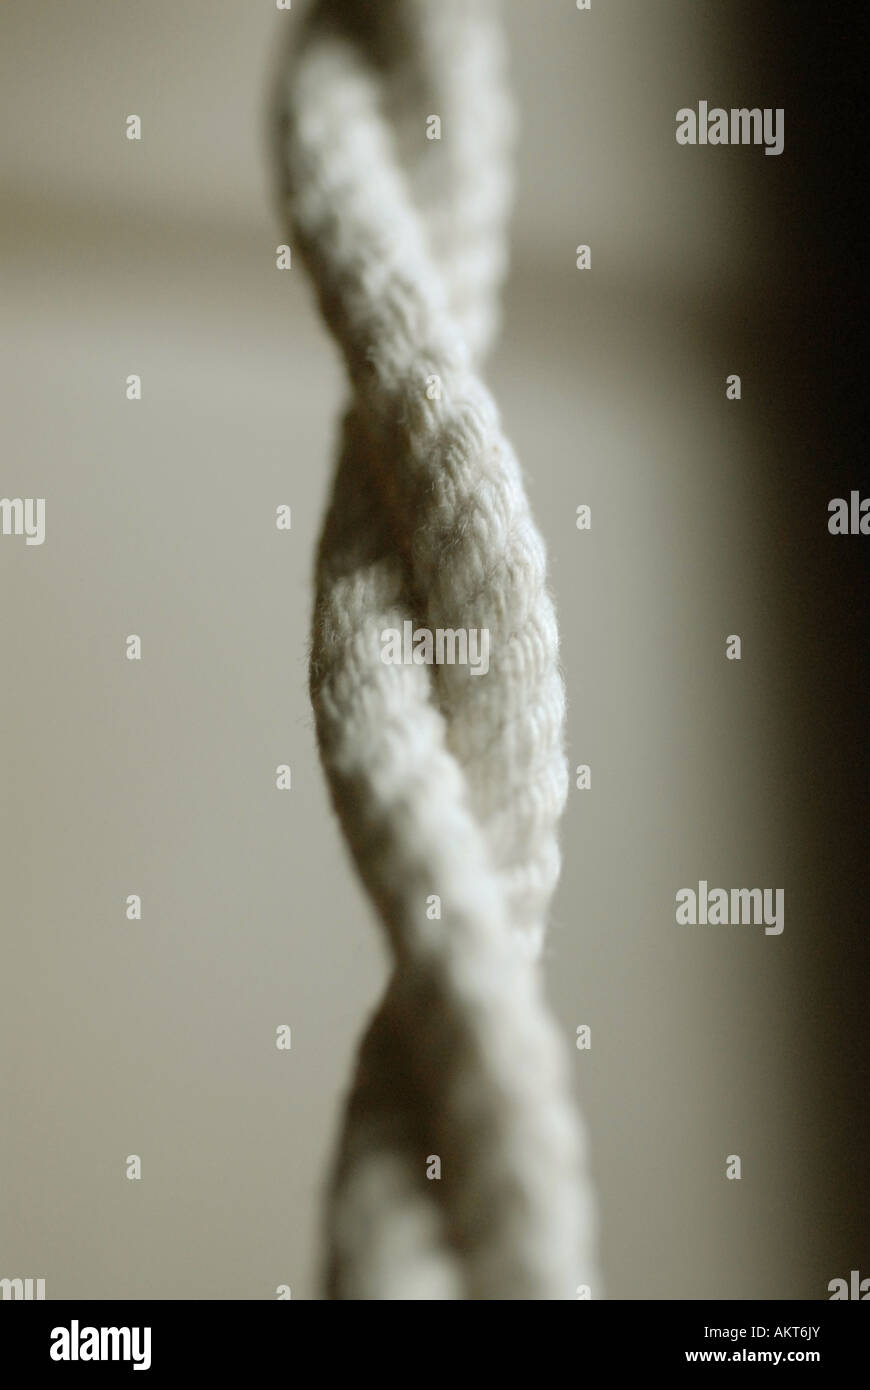 Close up detail of a rope Stock Photo